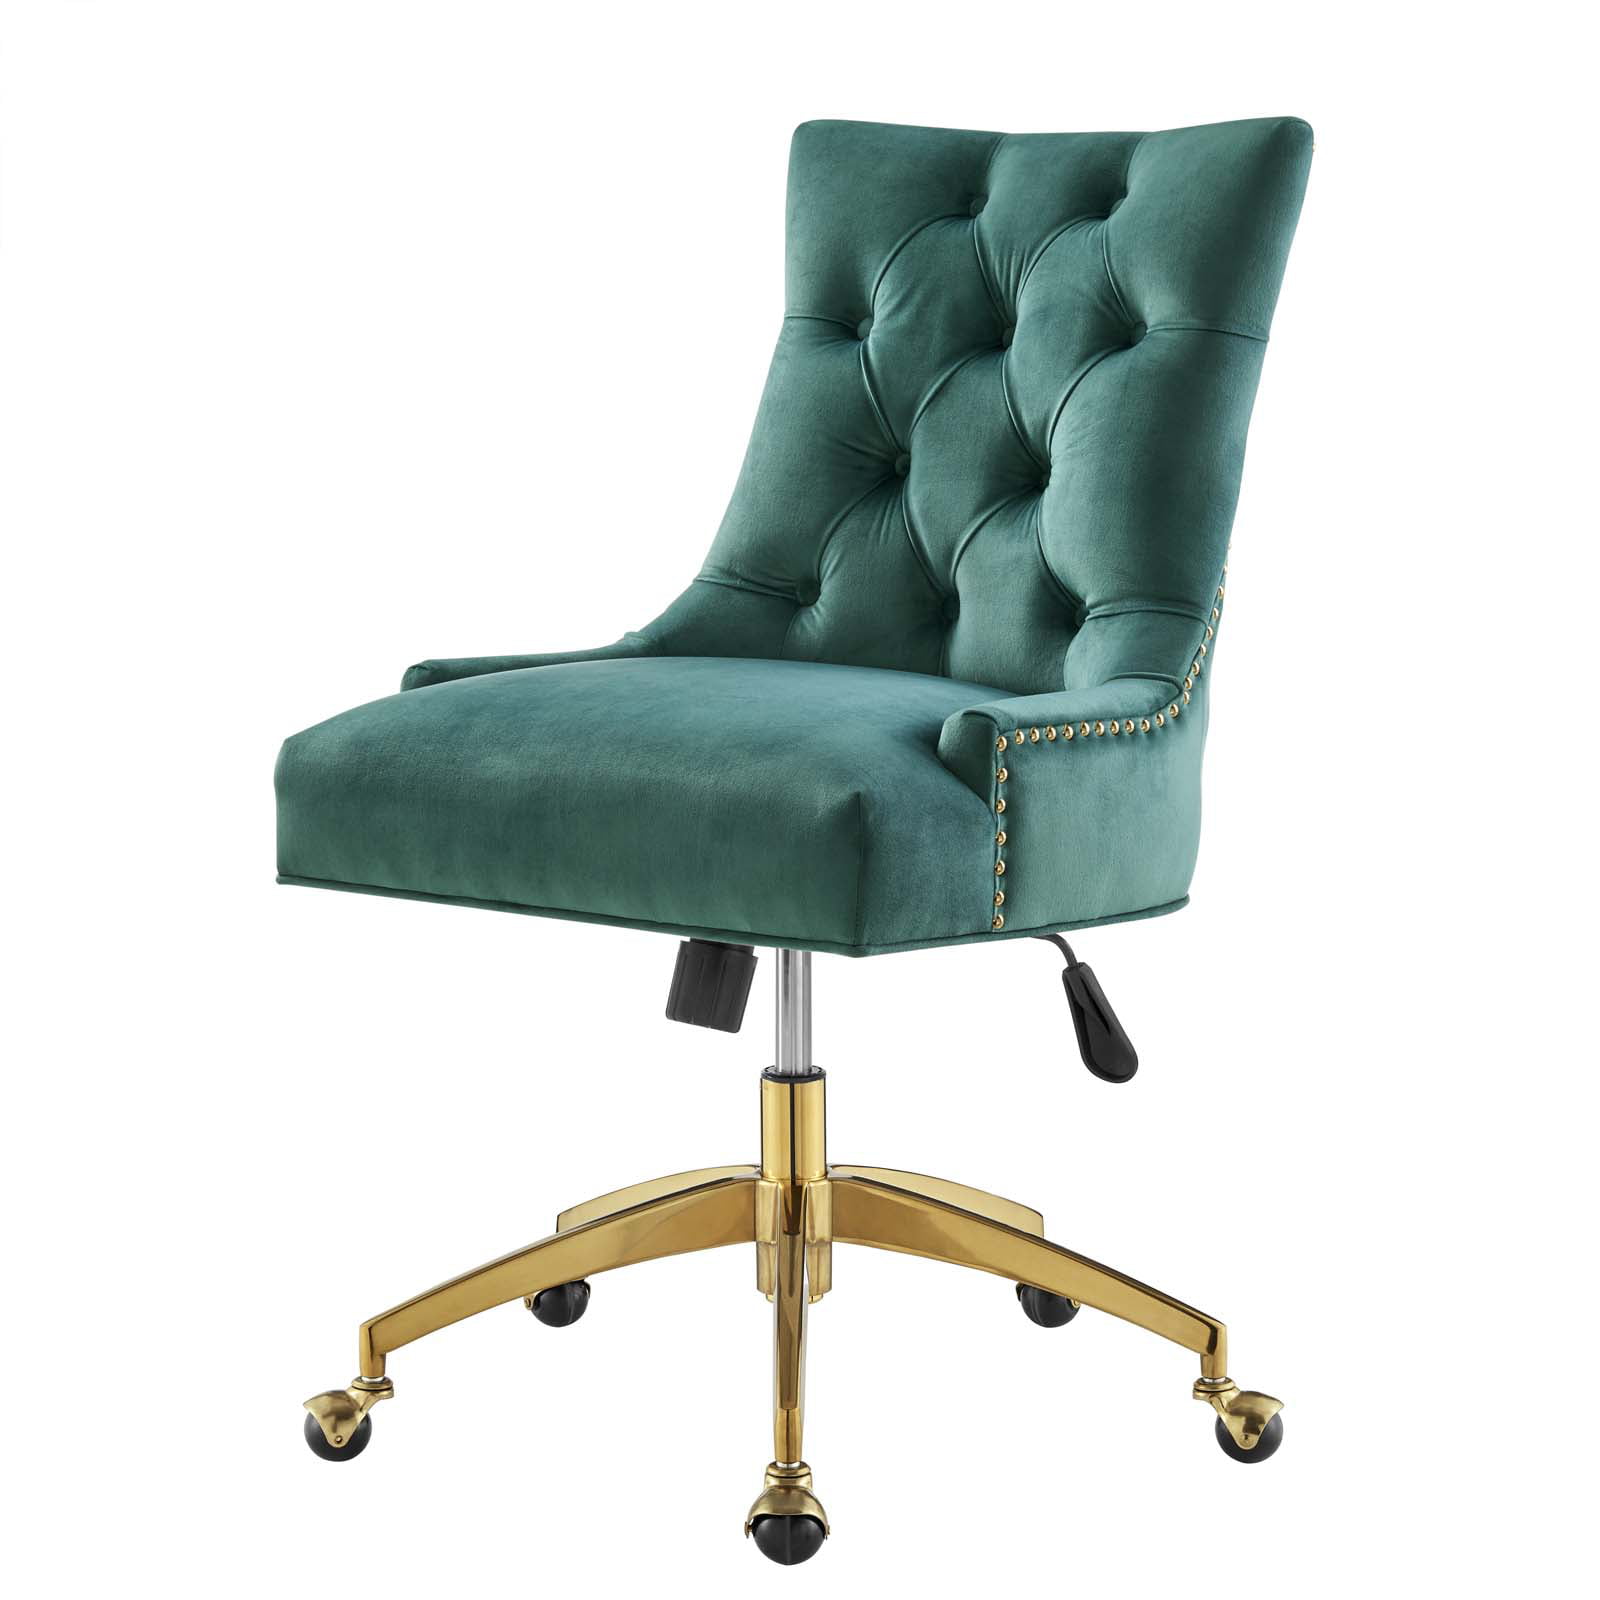 Traditional Economy Executive Tufted Desk Chair - Smart Buy Office  Furniture: Office Furniture Austin - Used Office Furniture